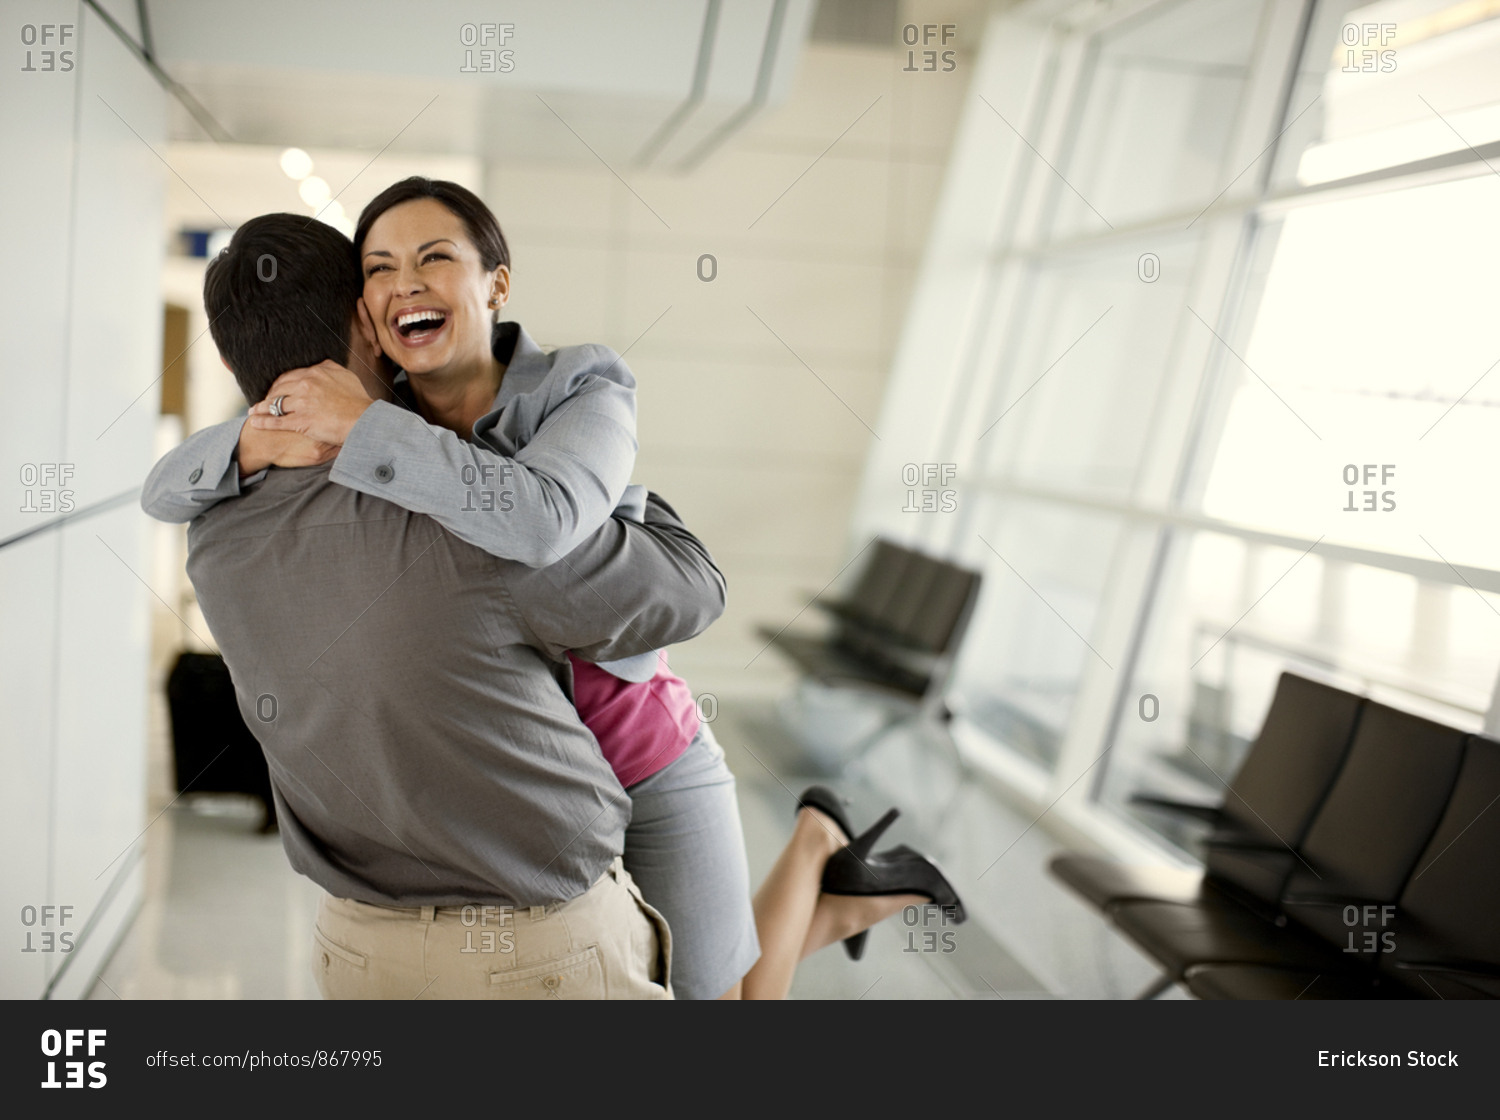 Mid adult woman grins happily as she joyfully hugs her husband who has met her at the airport arrivals gate.